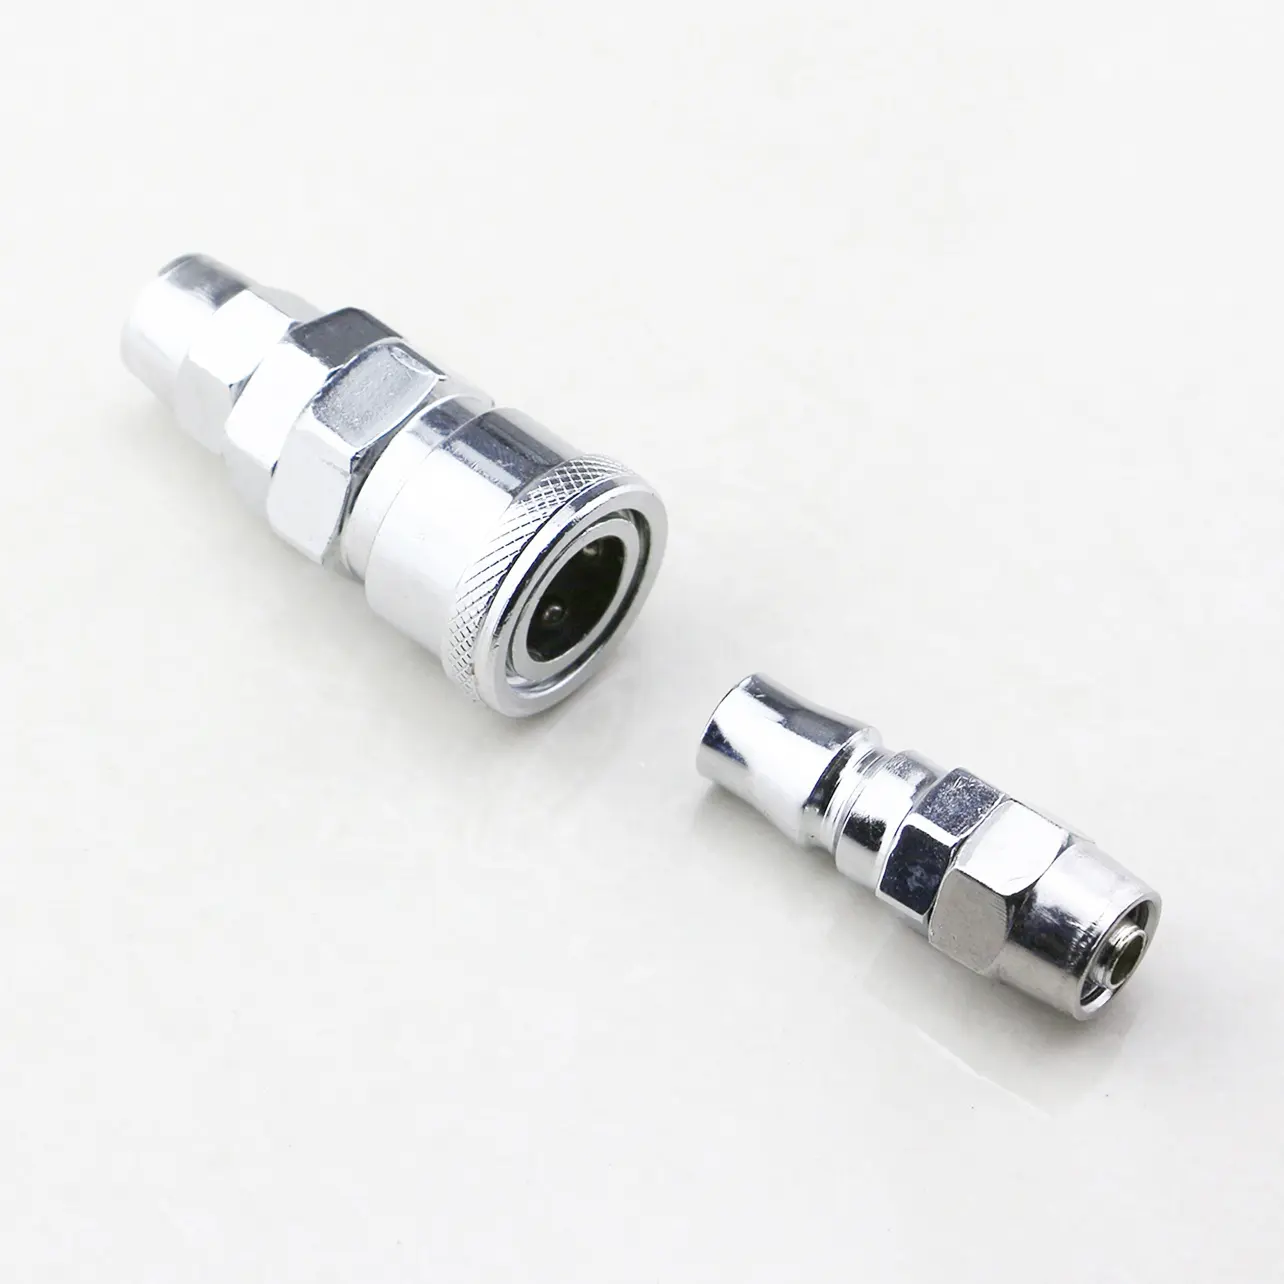 Japan Type Threaded Quick Couplers SP PP One Touch Pneumatic Quick Release Air Connectors Quick Coupler Air Compressor Fittings